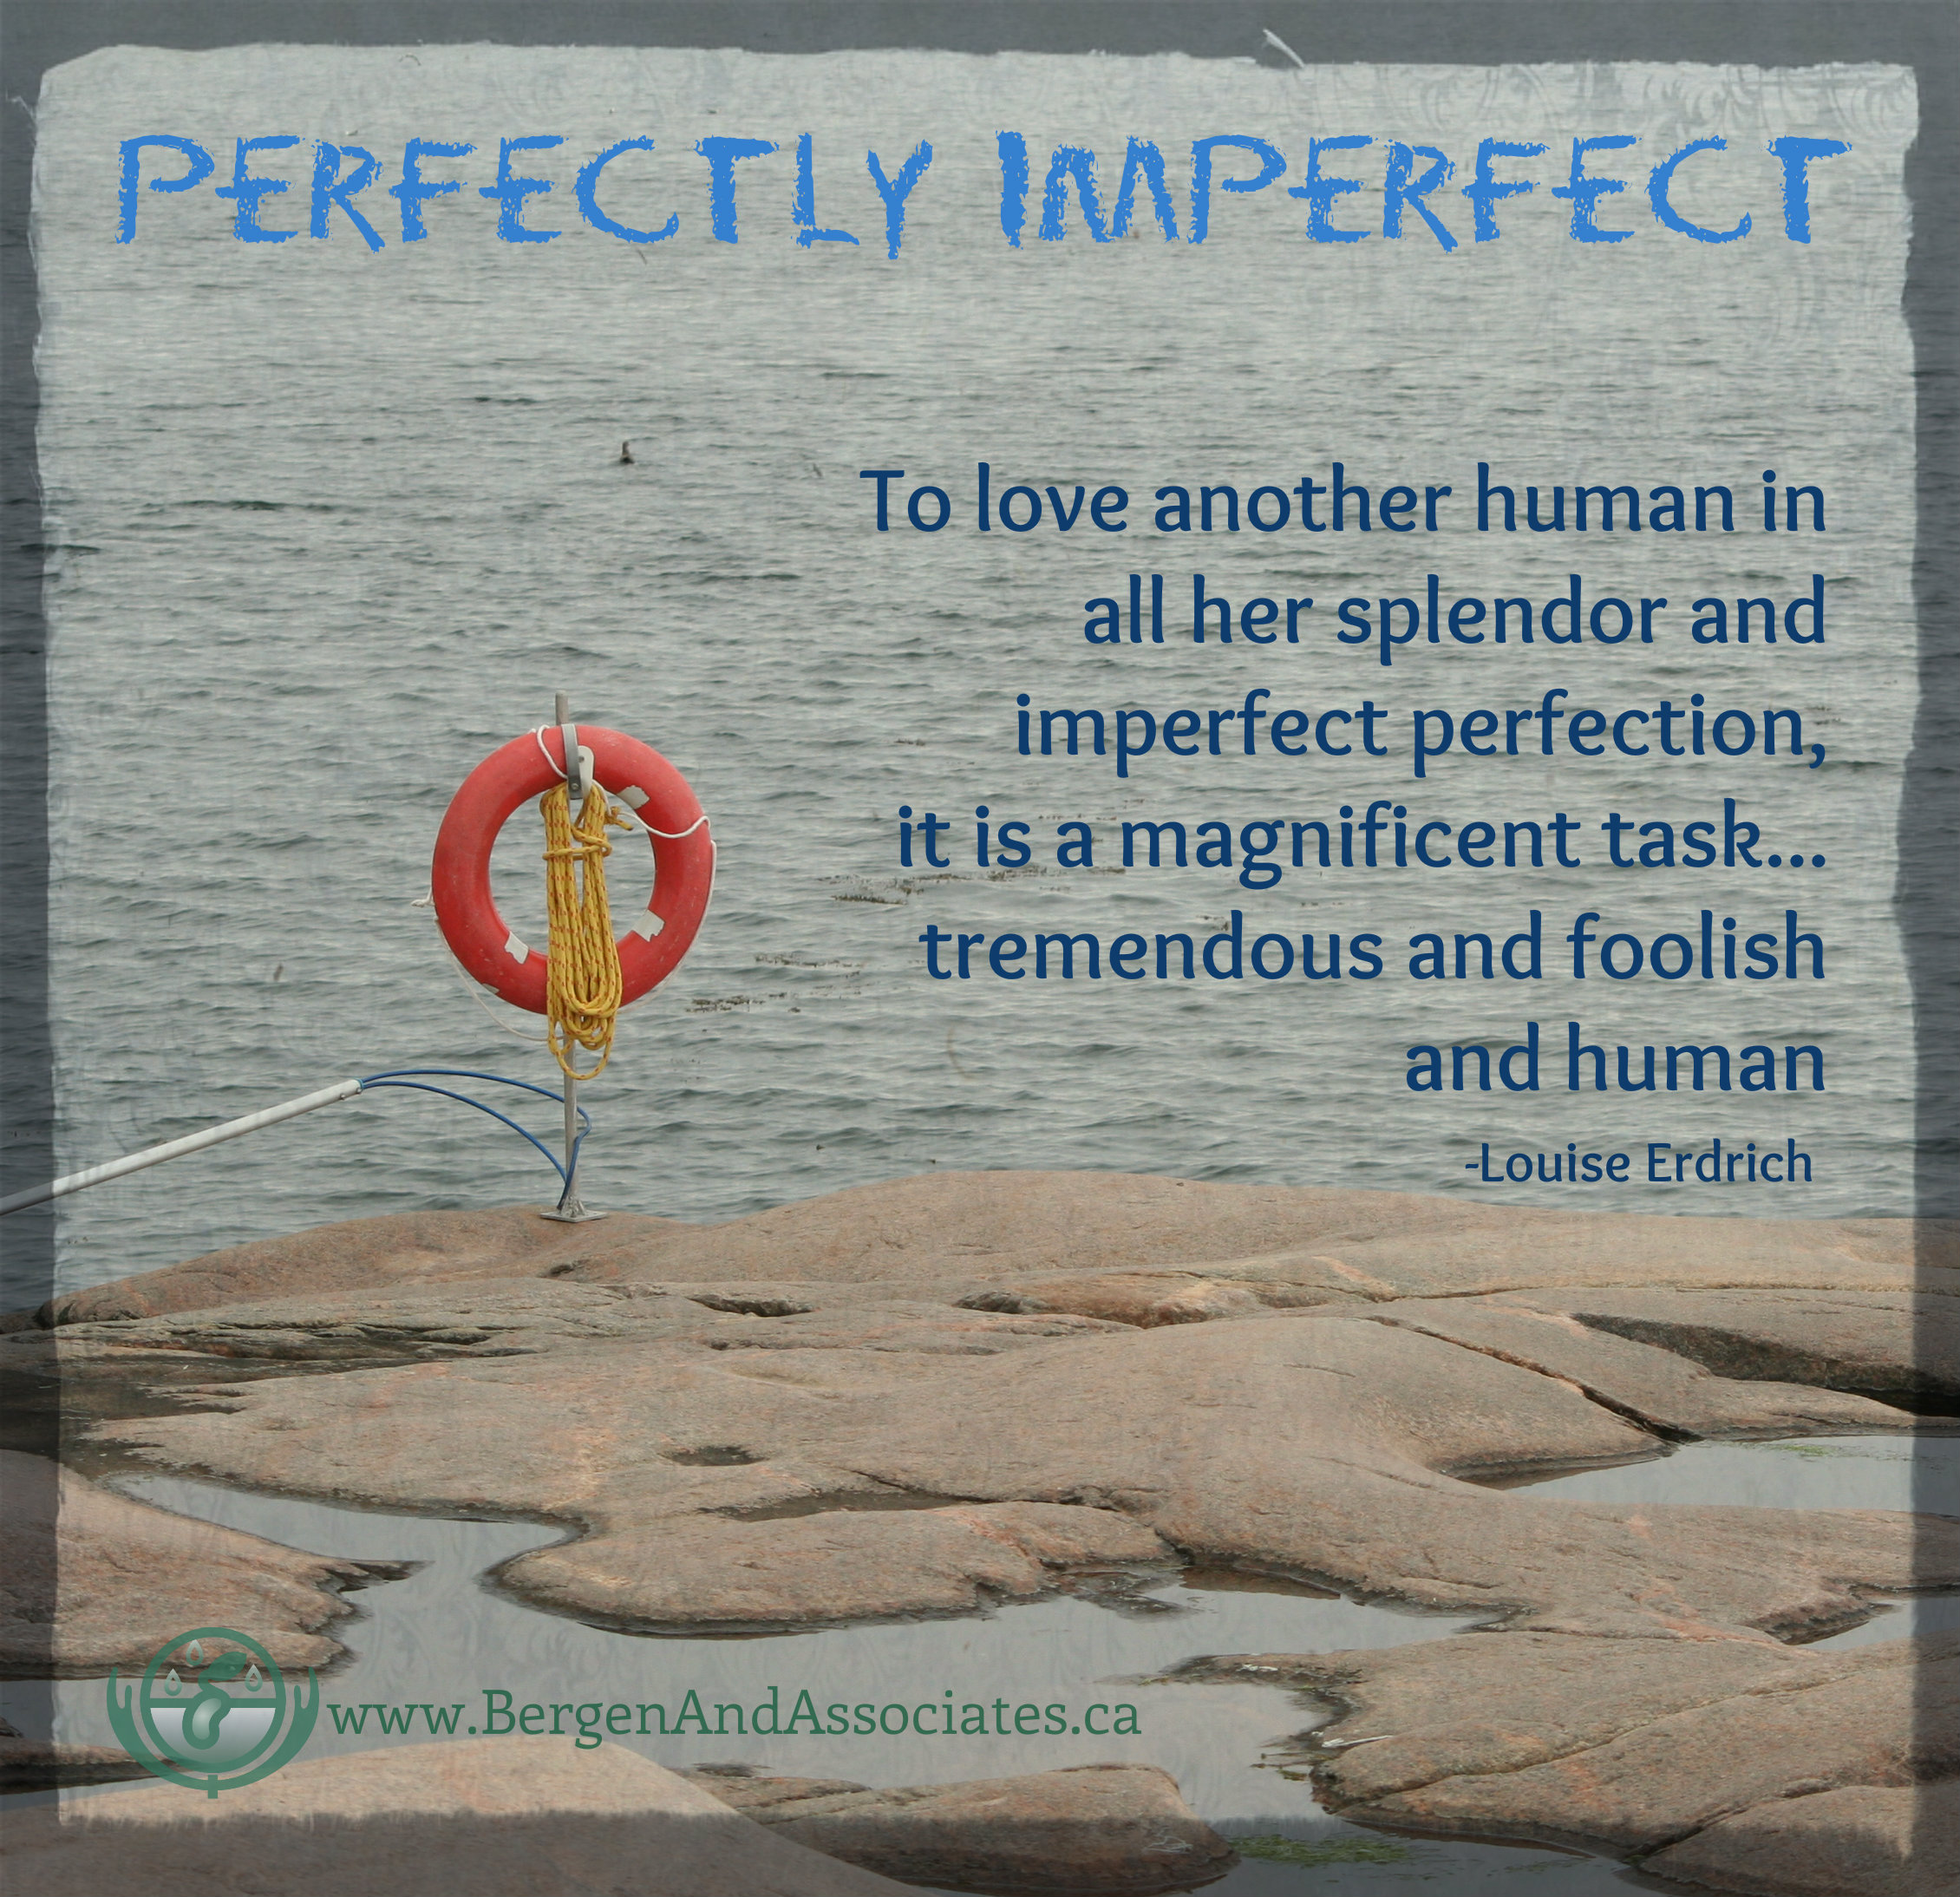 To love another another human in all of her splendor and imperfect perfection , it is a magnificent task...tremendous and foolish and human quote by Louise Erdrich 